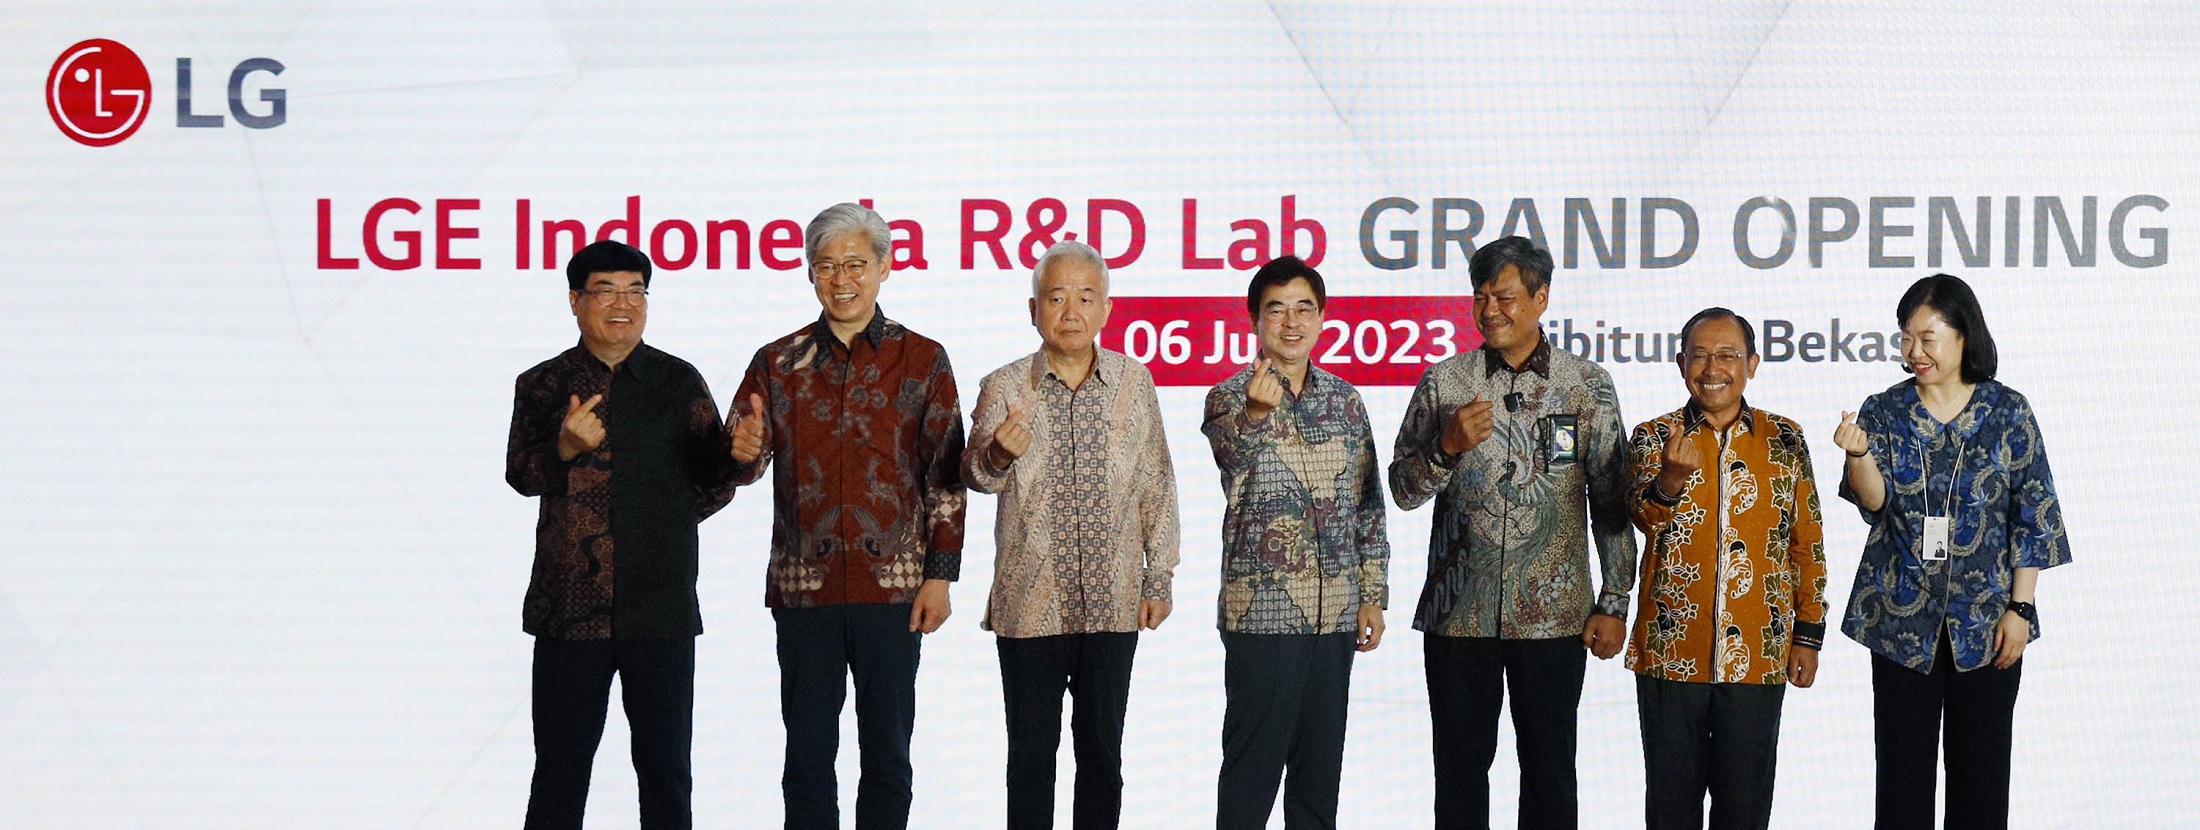 Representatives from LG Electronics and its Indonesian subsidiary pose for a photo during the grand opening ceremony of the LGE Indonesia R&D Lab